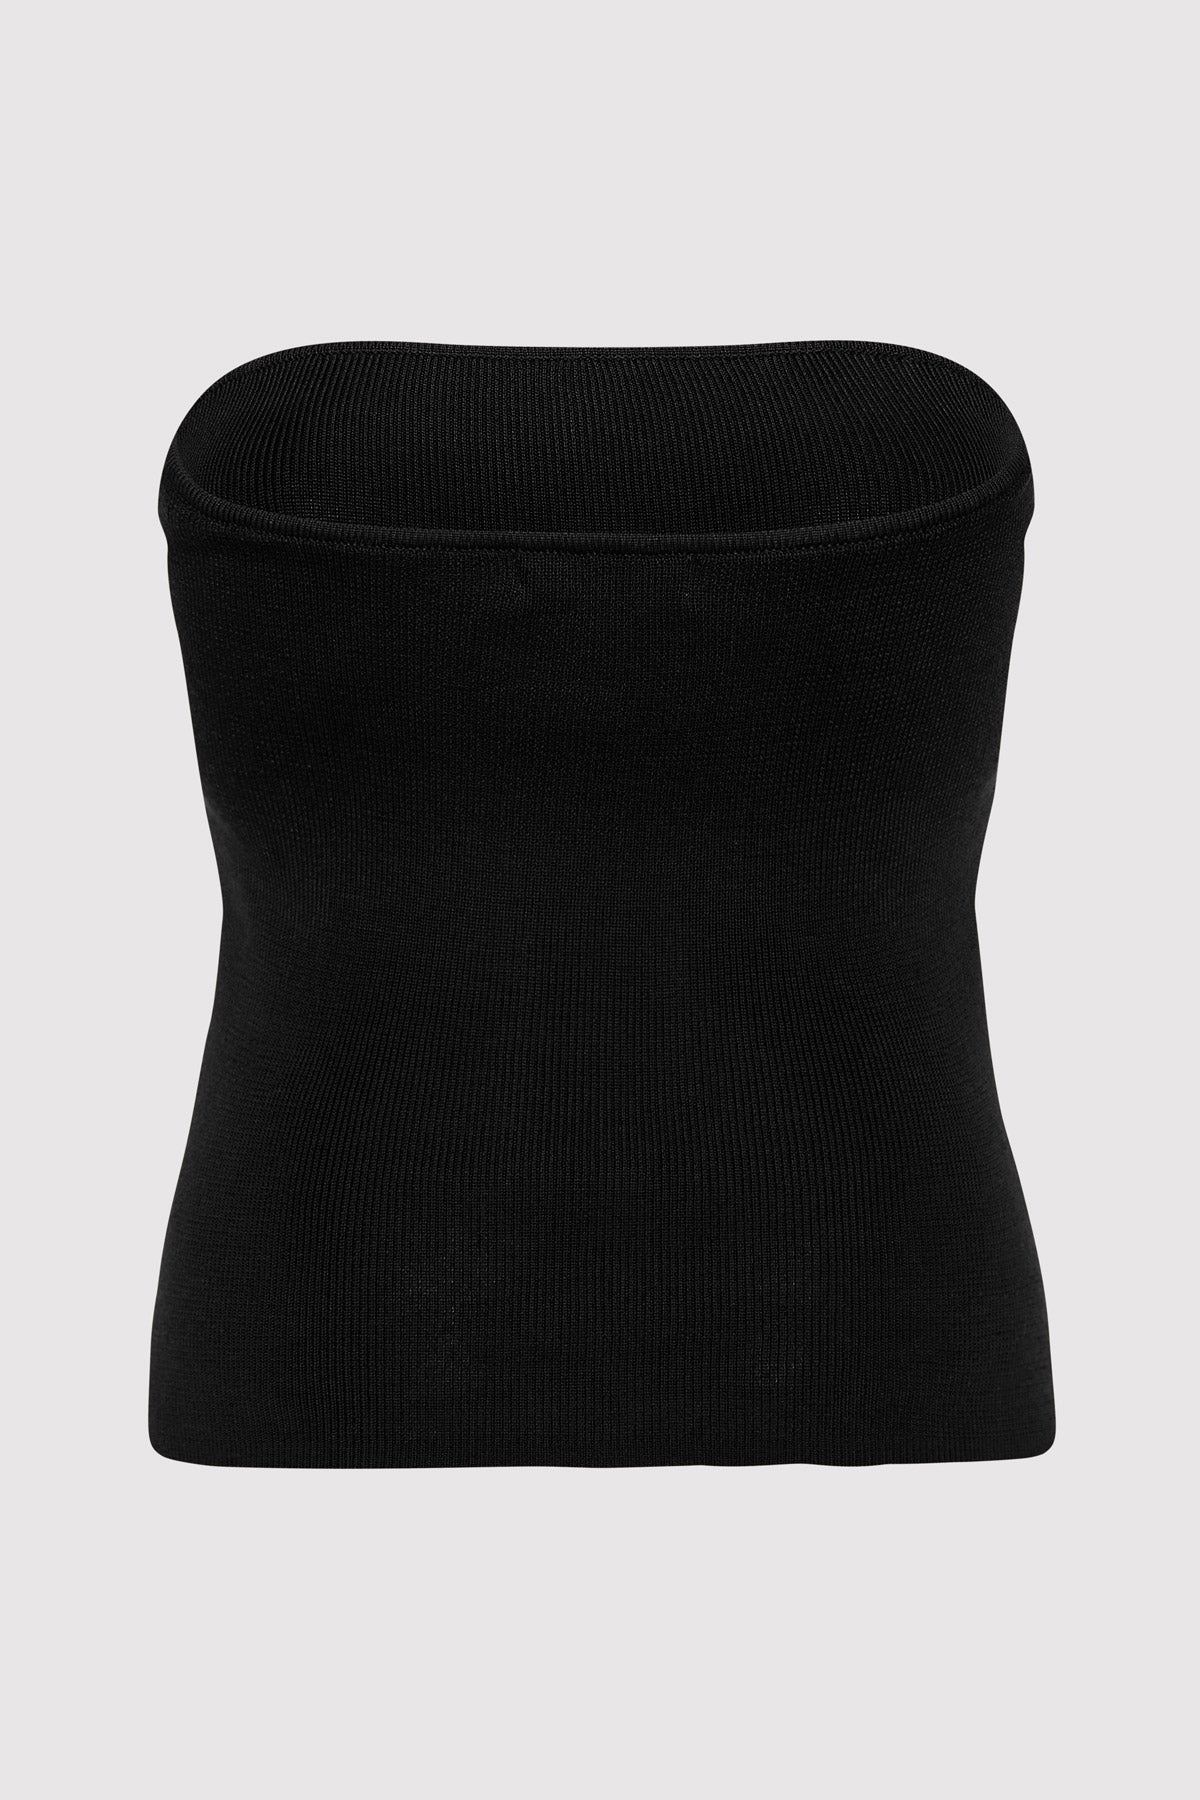 90s Strapless Knit Top - Black